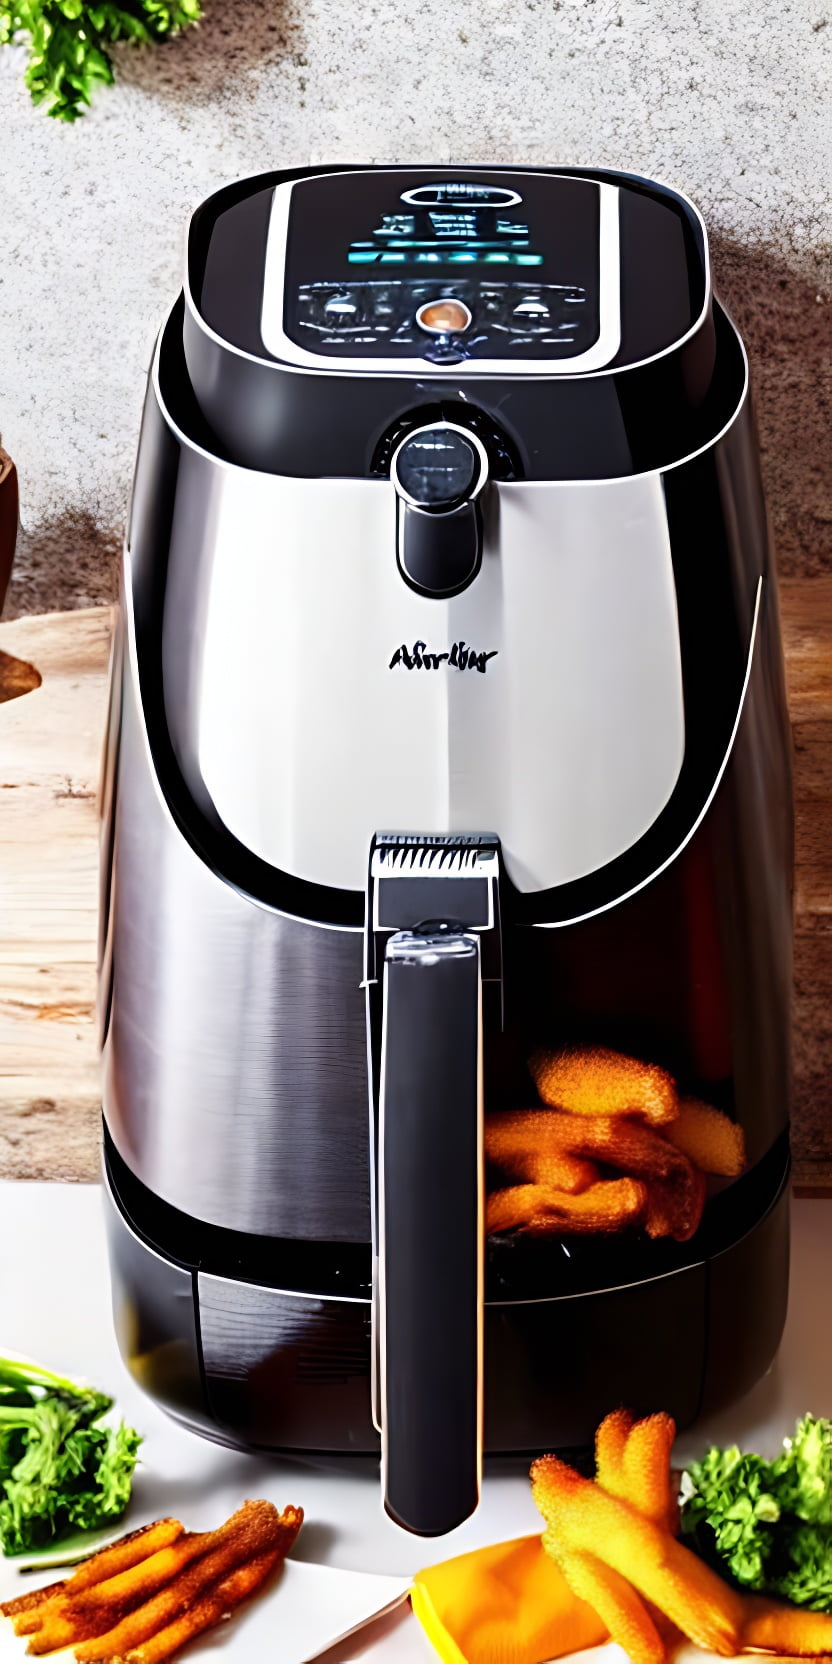 How to clean your air fryer in 5 easy steps - plus deodorizing tips